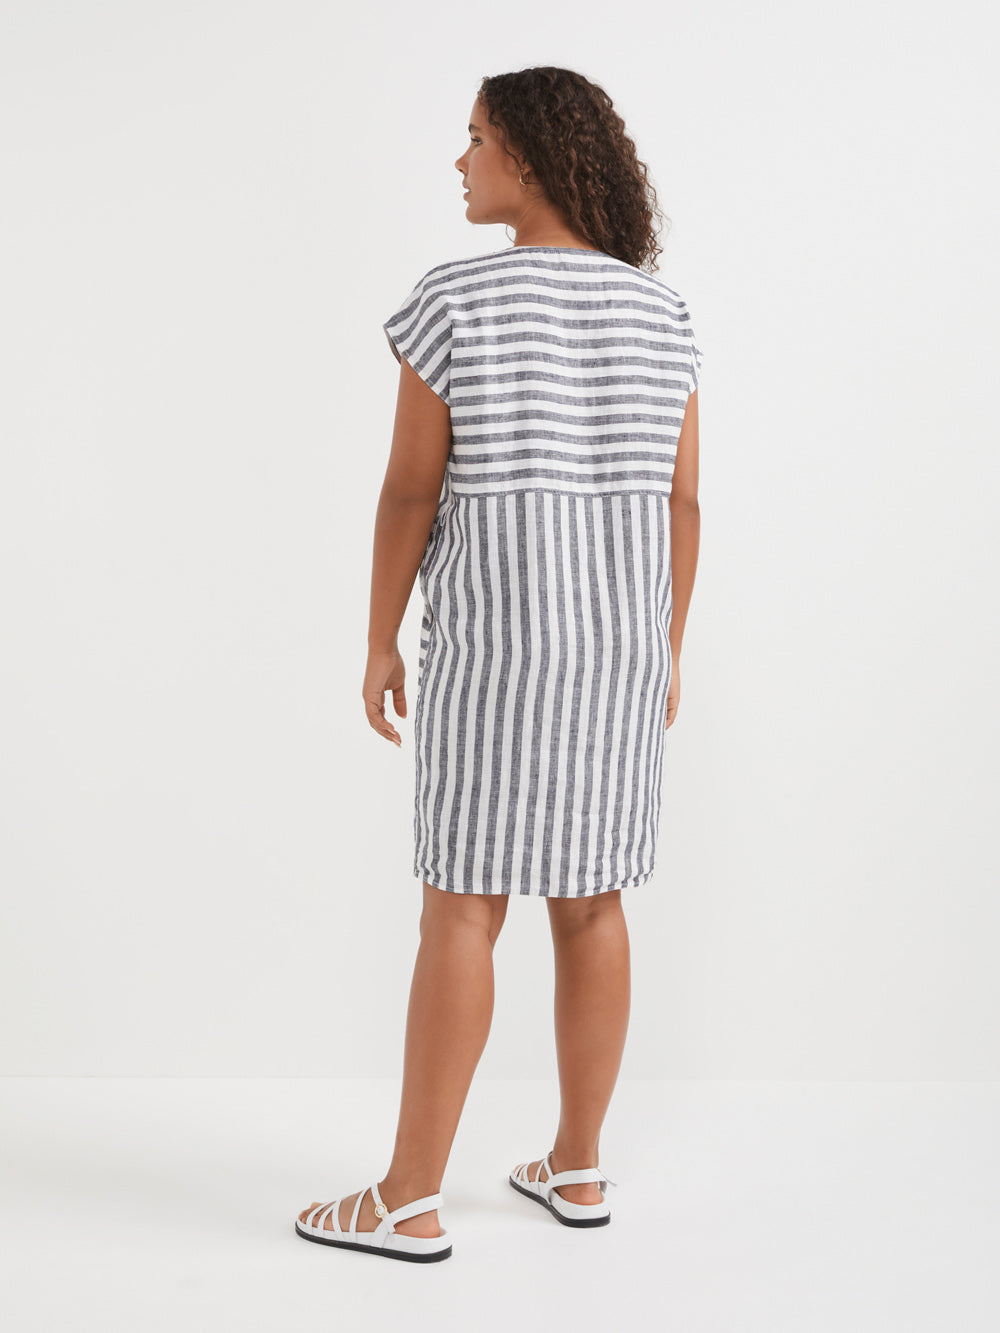 The Washed Linen Stripe Dress